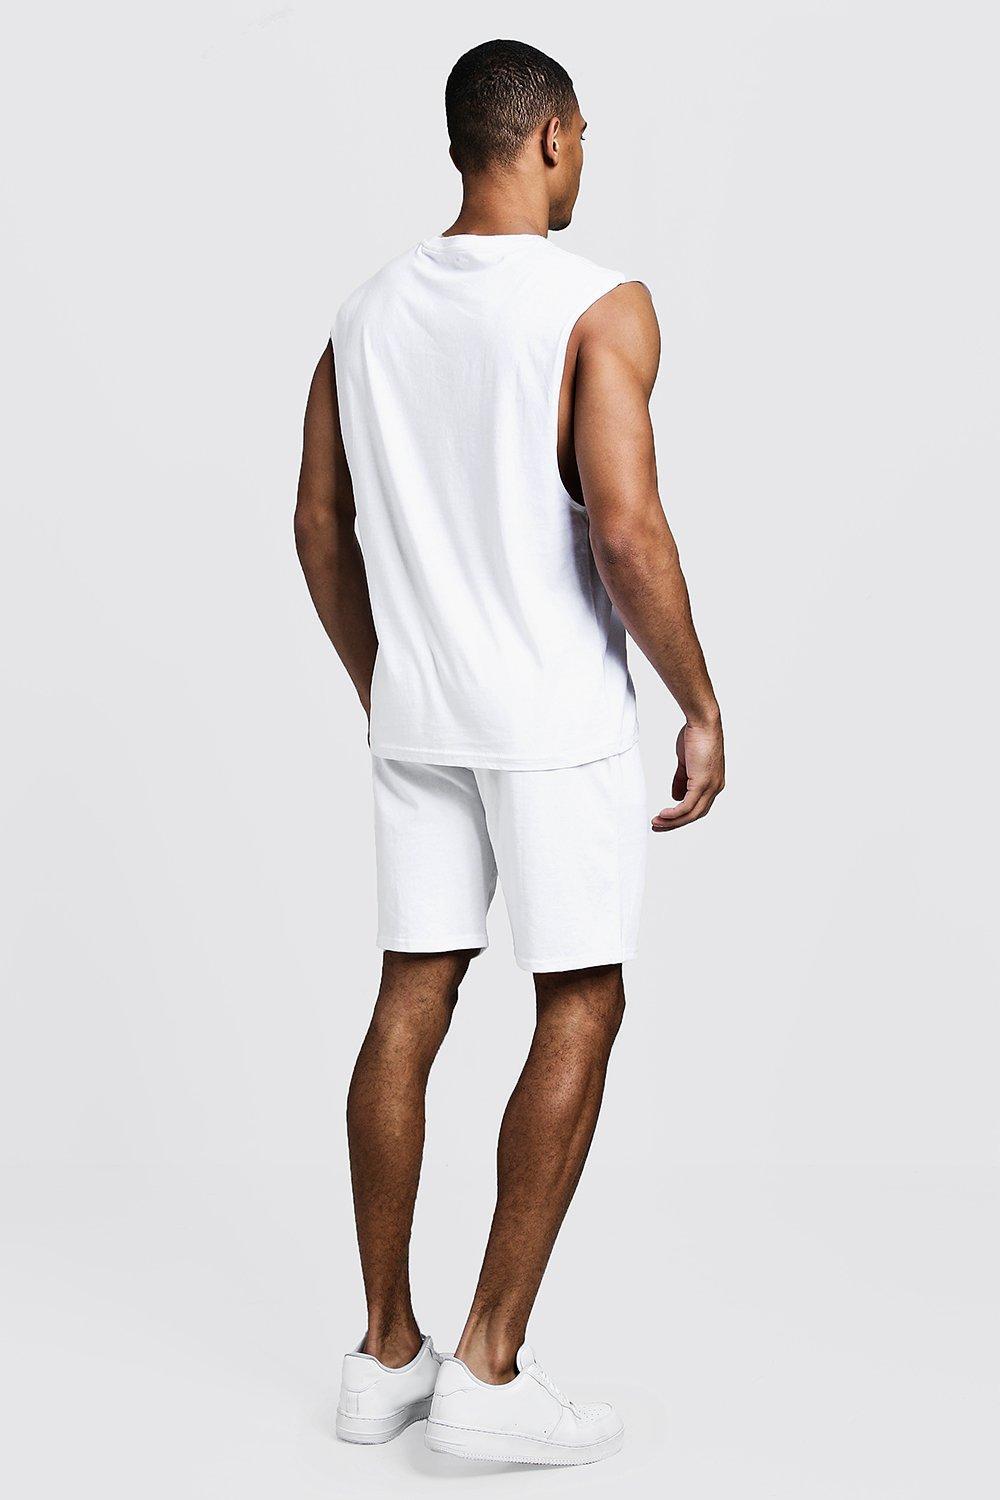 BoohooMAN Jersey Mid Length Shorts in White for Men - Lyst